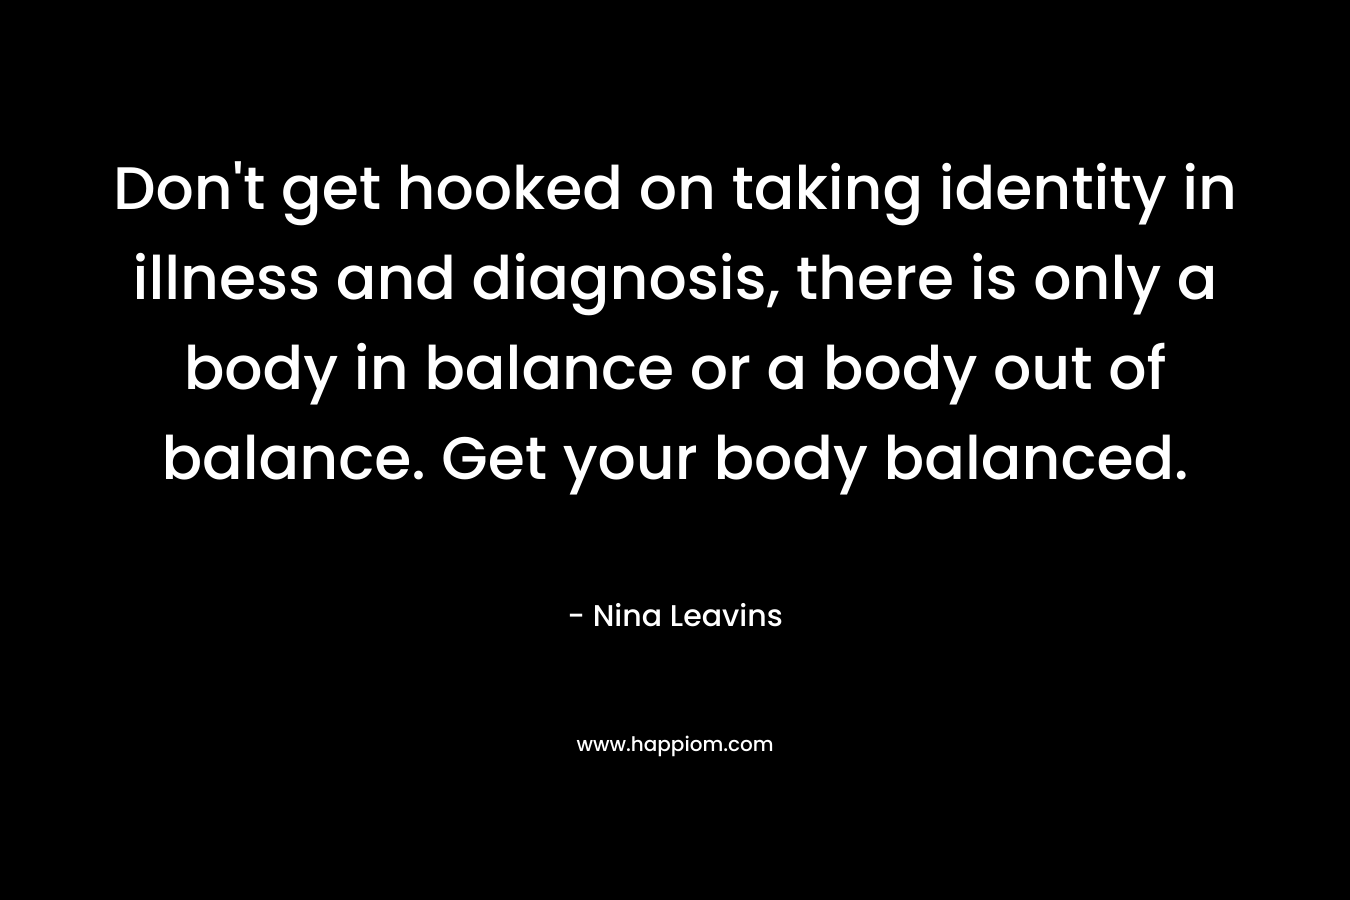 Don't get hooked on taking identity in illness and diagnosis, there is only a body in balance or a body out of balance. Get your body balanced.